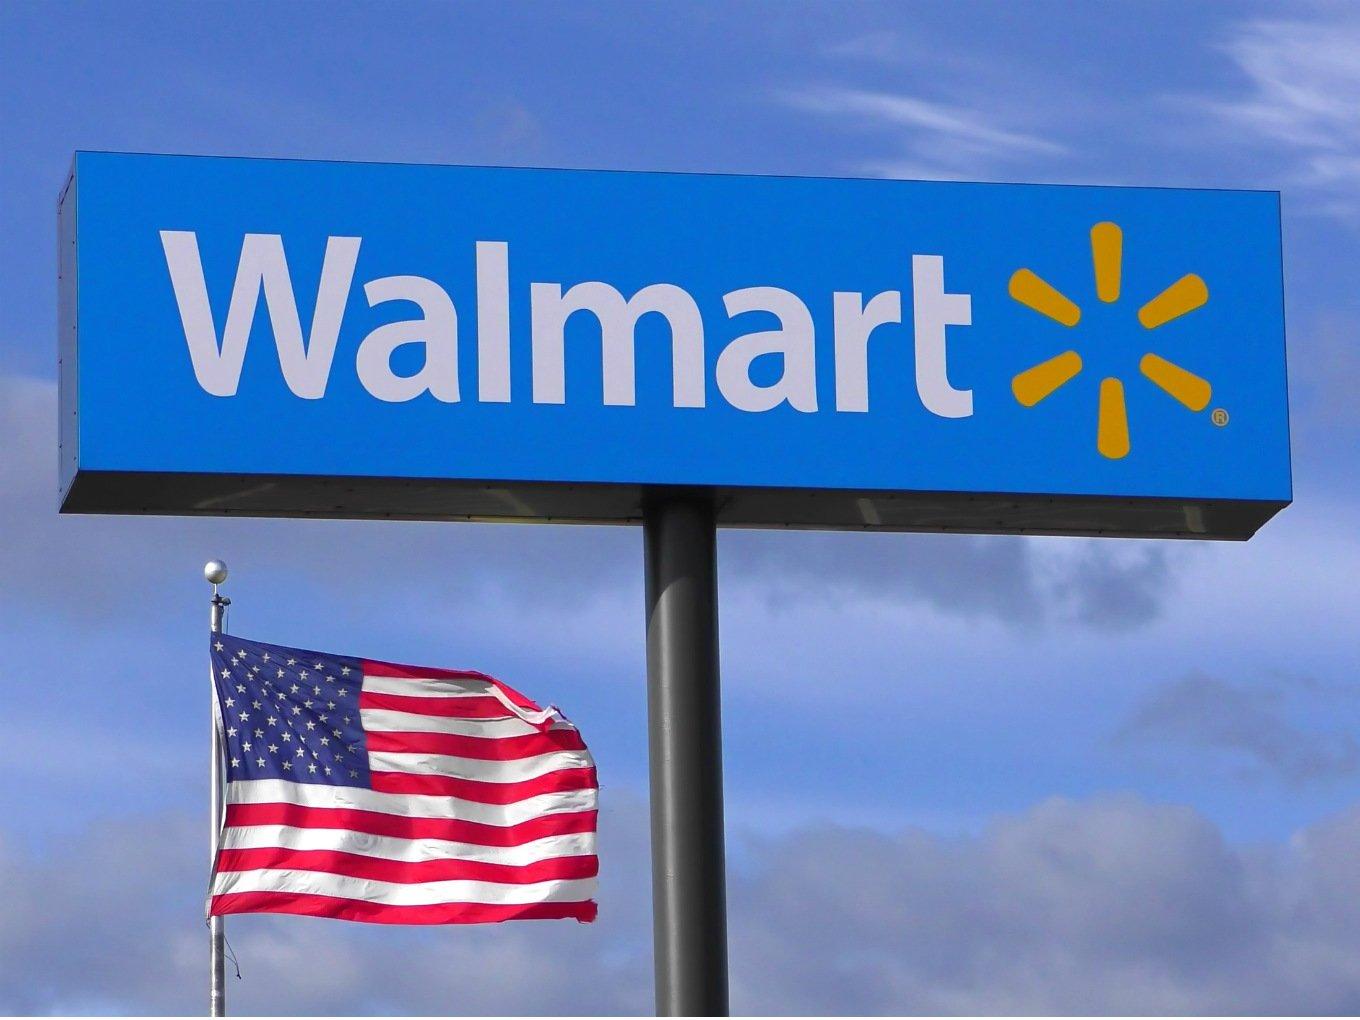 Walmart CEO McMillon Disappointed Over India's New FDI Ecommerce Rule